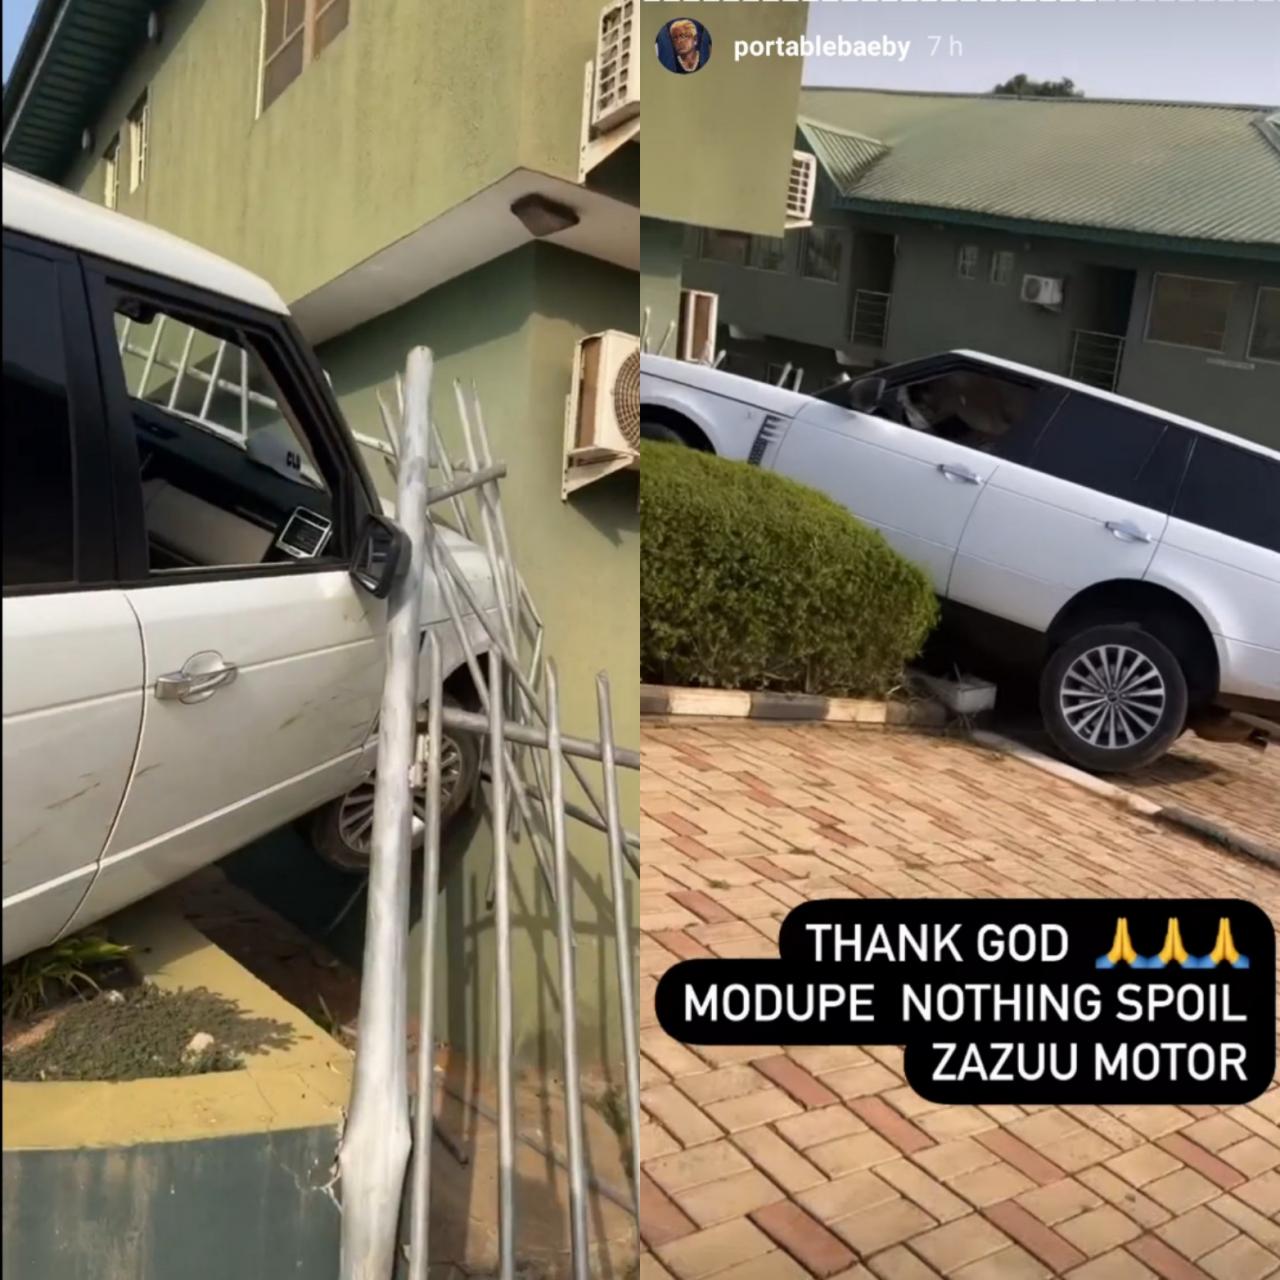 Portable thanks God after surviving accident with his Range Rover (video)